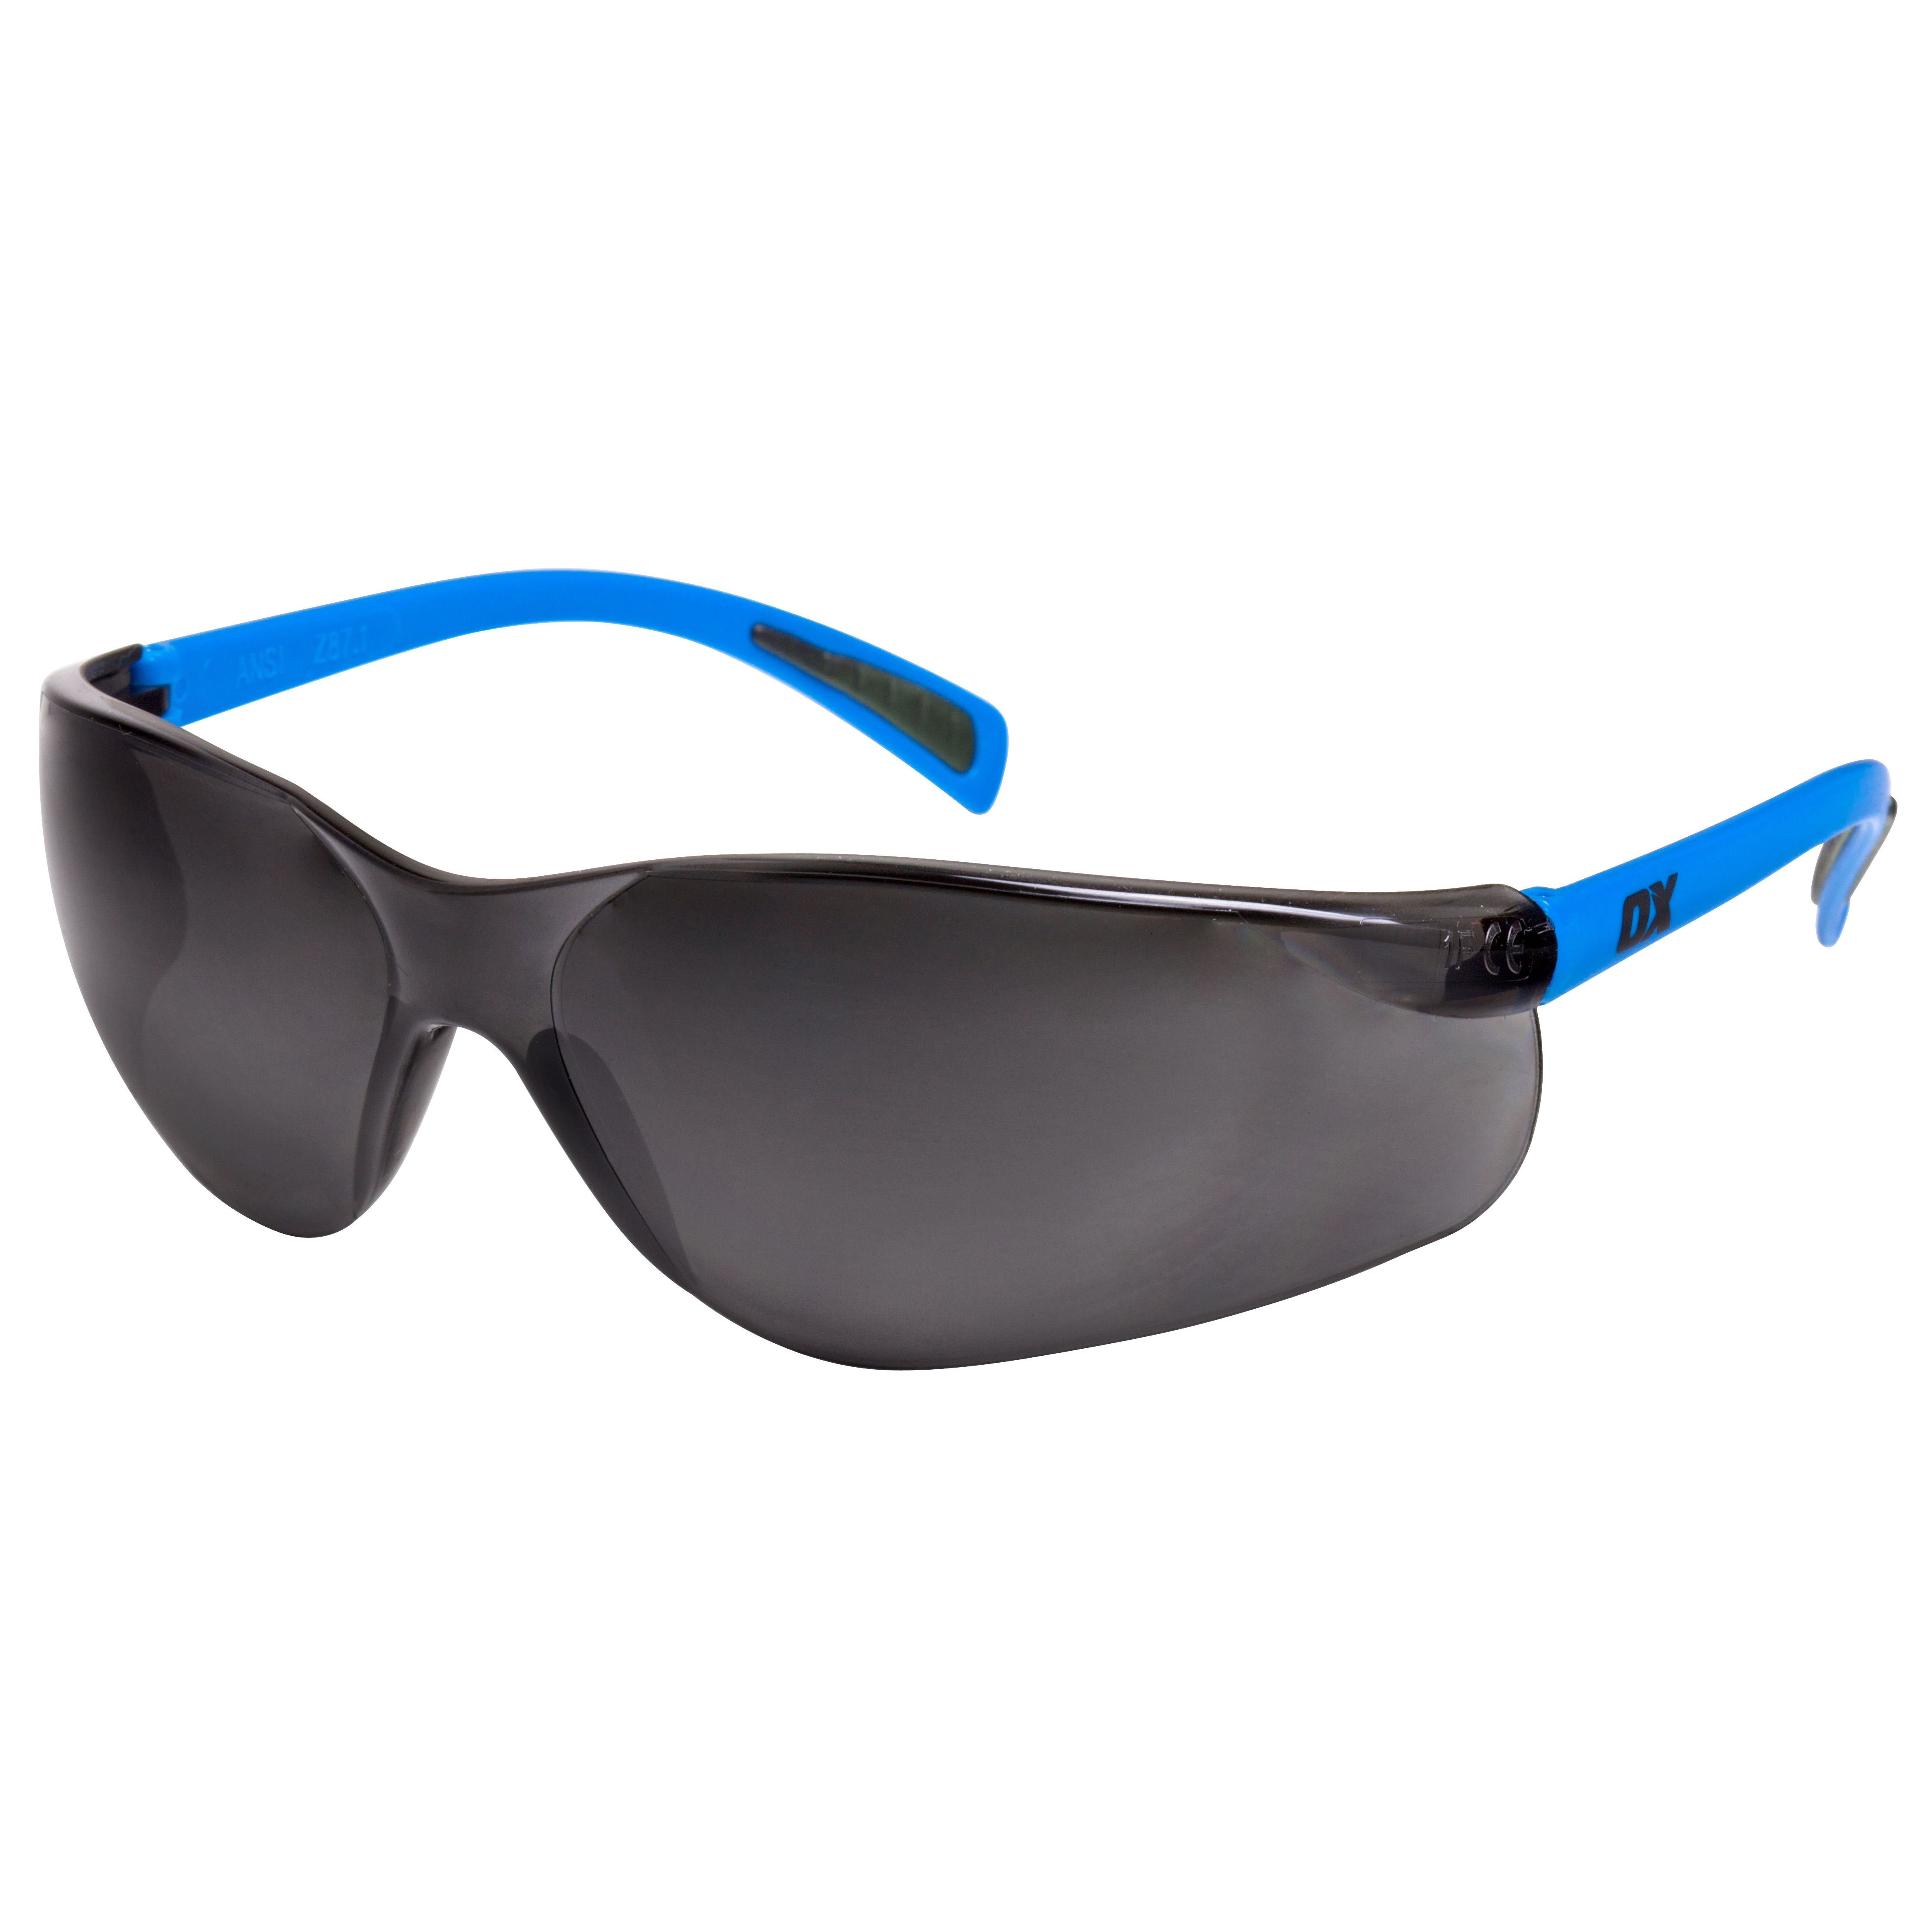 OX Safety Glasses Smoked - OX-S241702